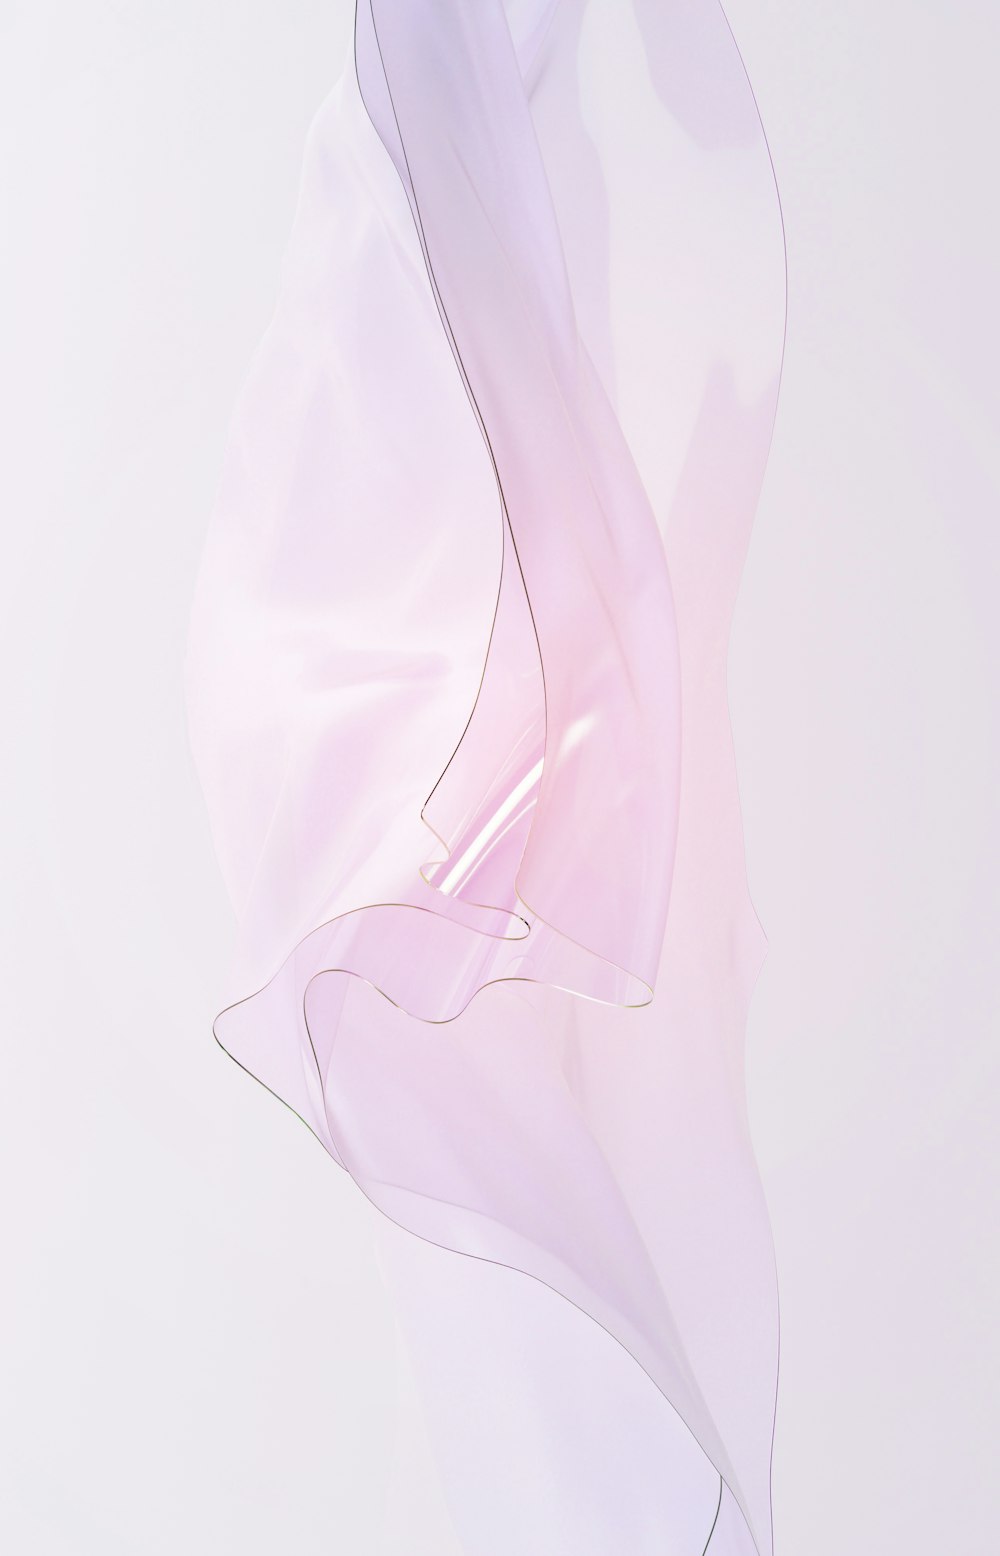 an abstract photograph of a white fabric